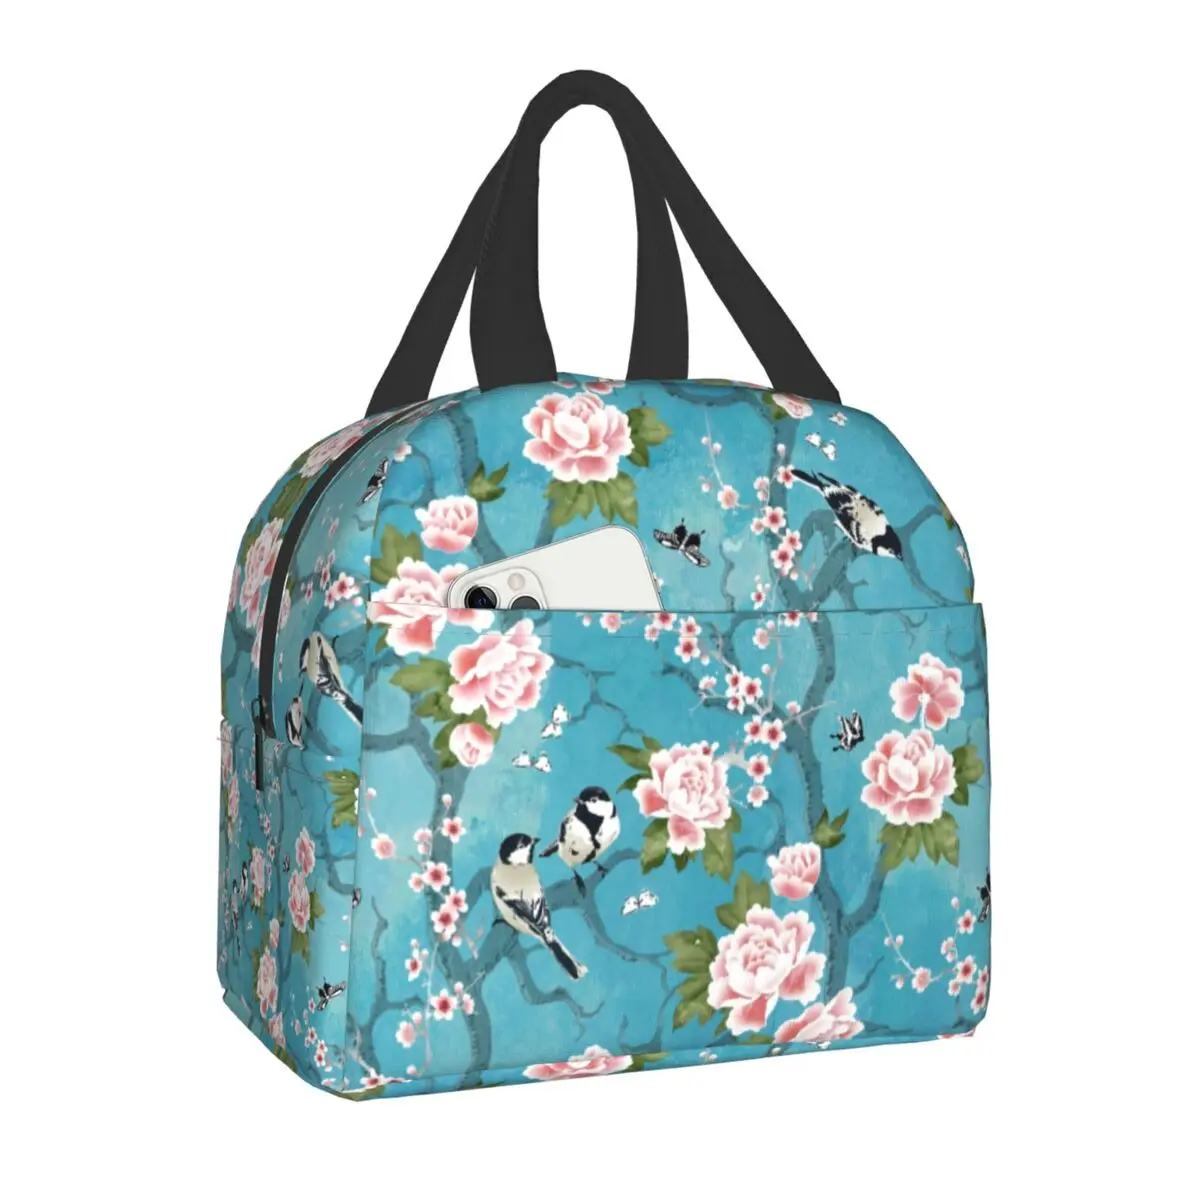 

Chinoiserie Birds Floral Insulated Lunch Bag Peony Sakura Flowers Cherry Blossom Thermal Cooler Lunch Box for Women Kids School